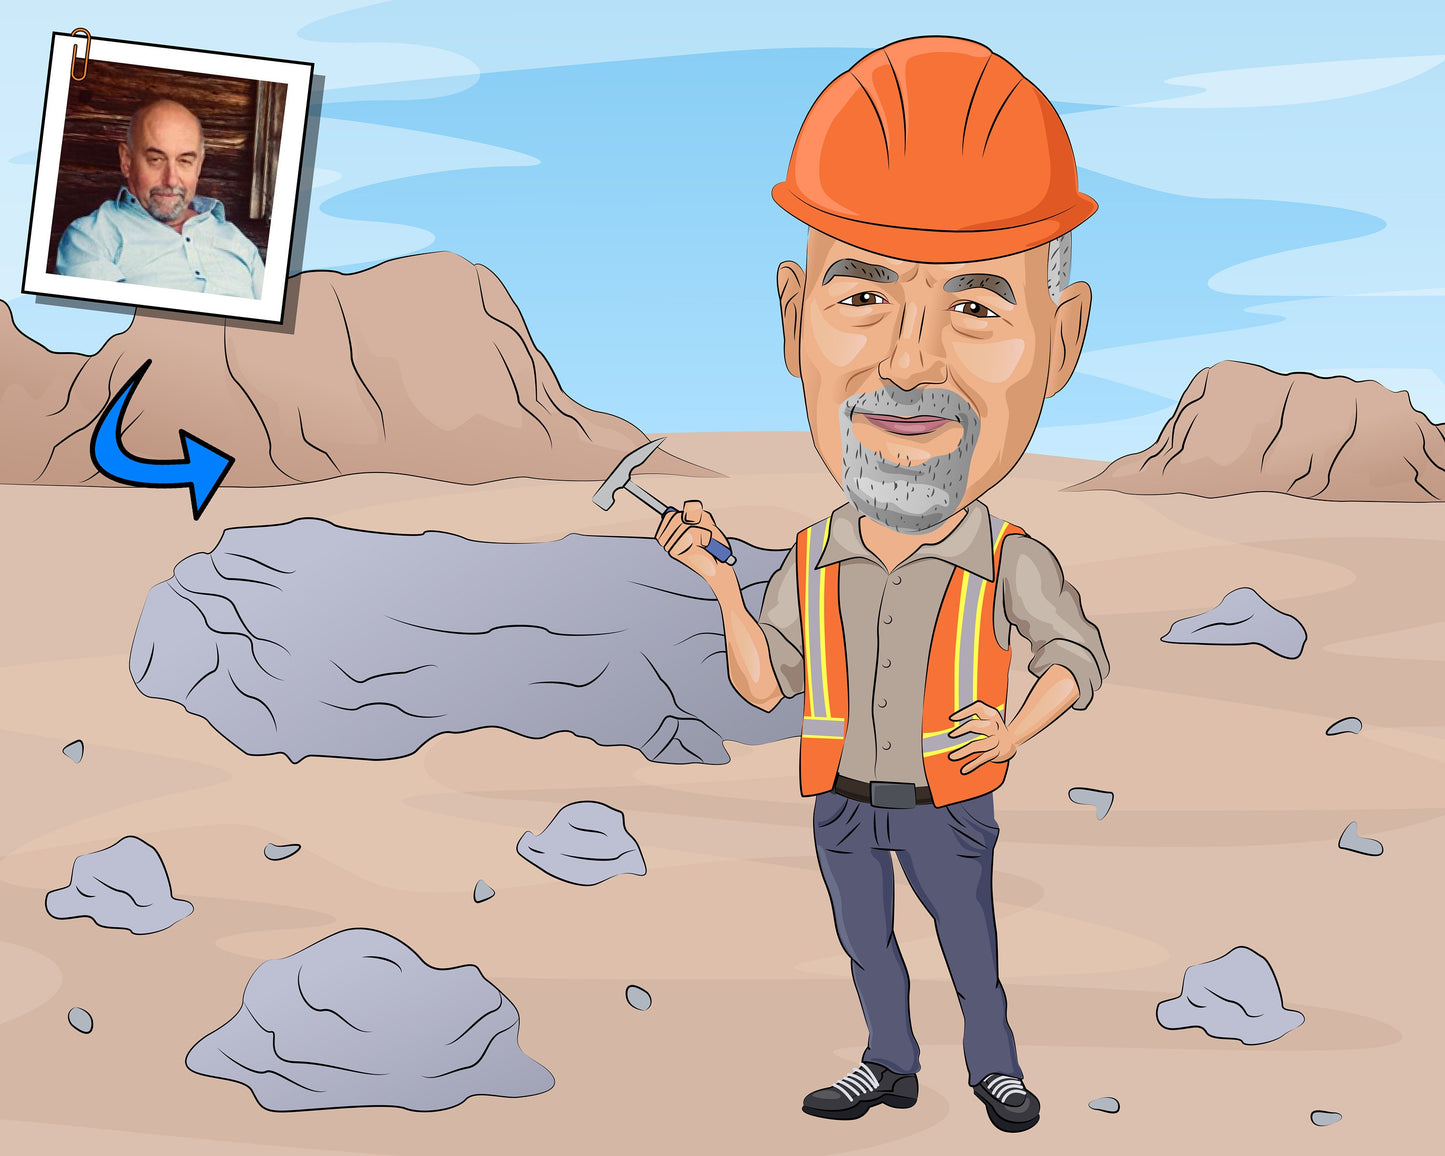 Geologist Gift - Custom Caricature Portrait From Your Photo/earth scientist/geology student gift